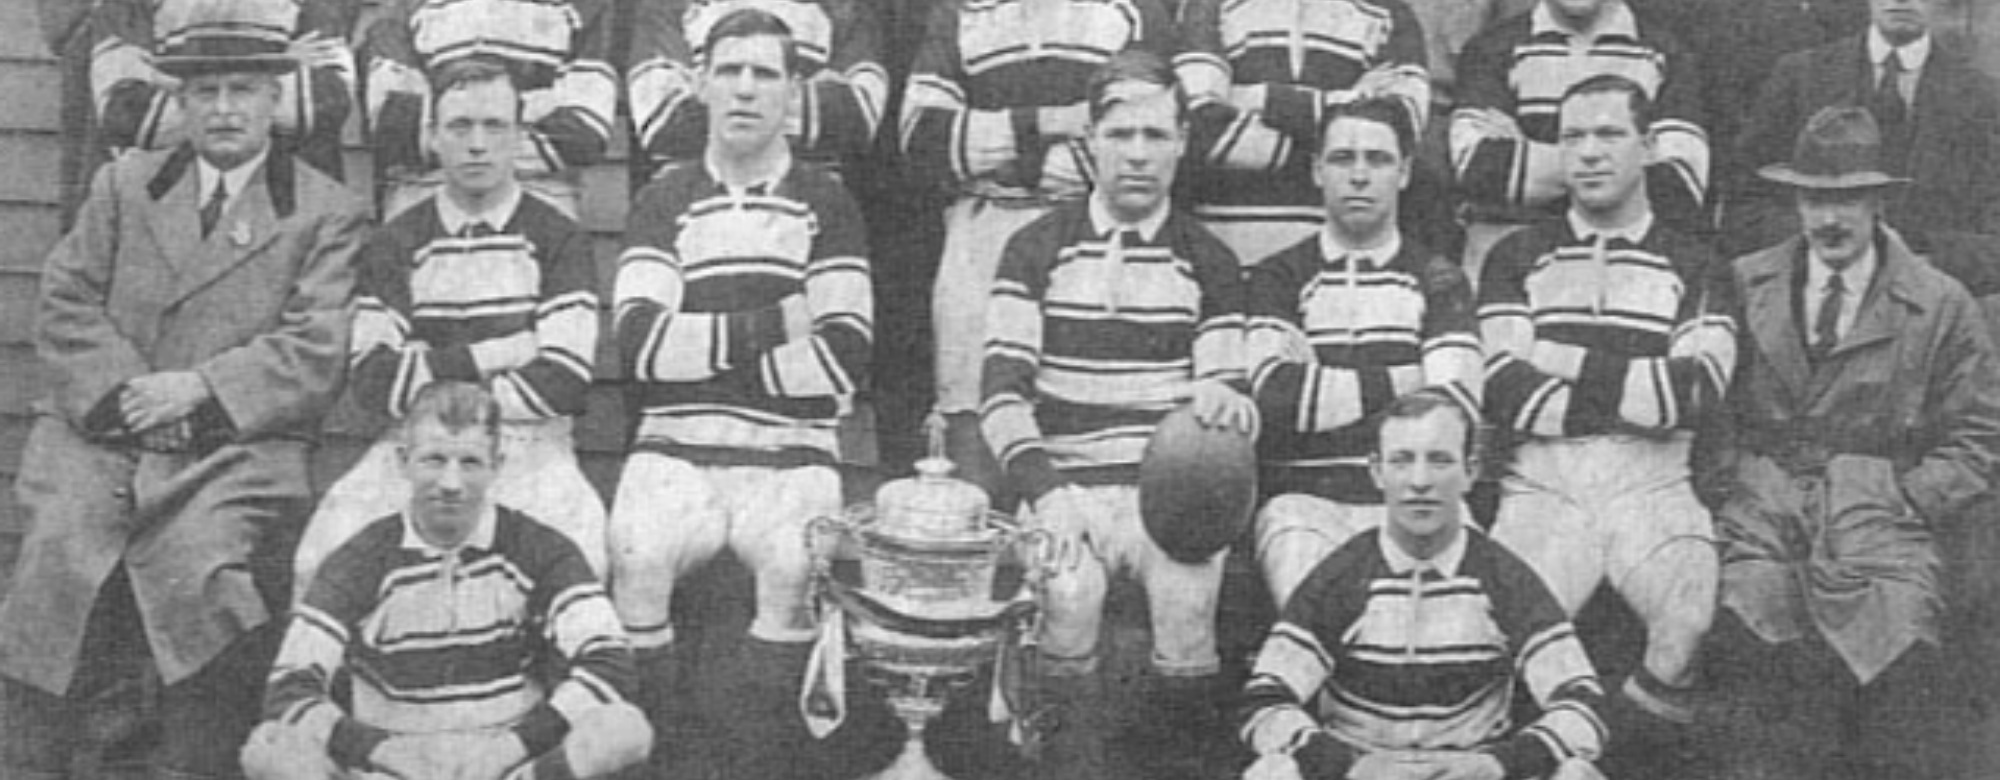 Hull’s Maiden RL Championship Win, 101 Years Ago Today